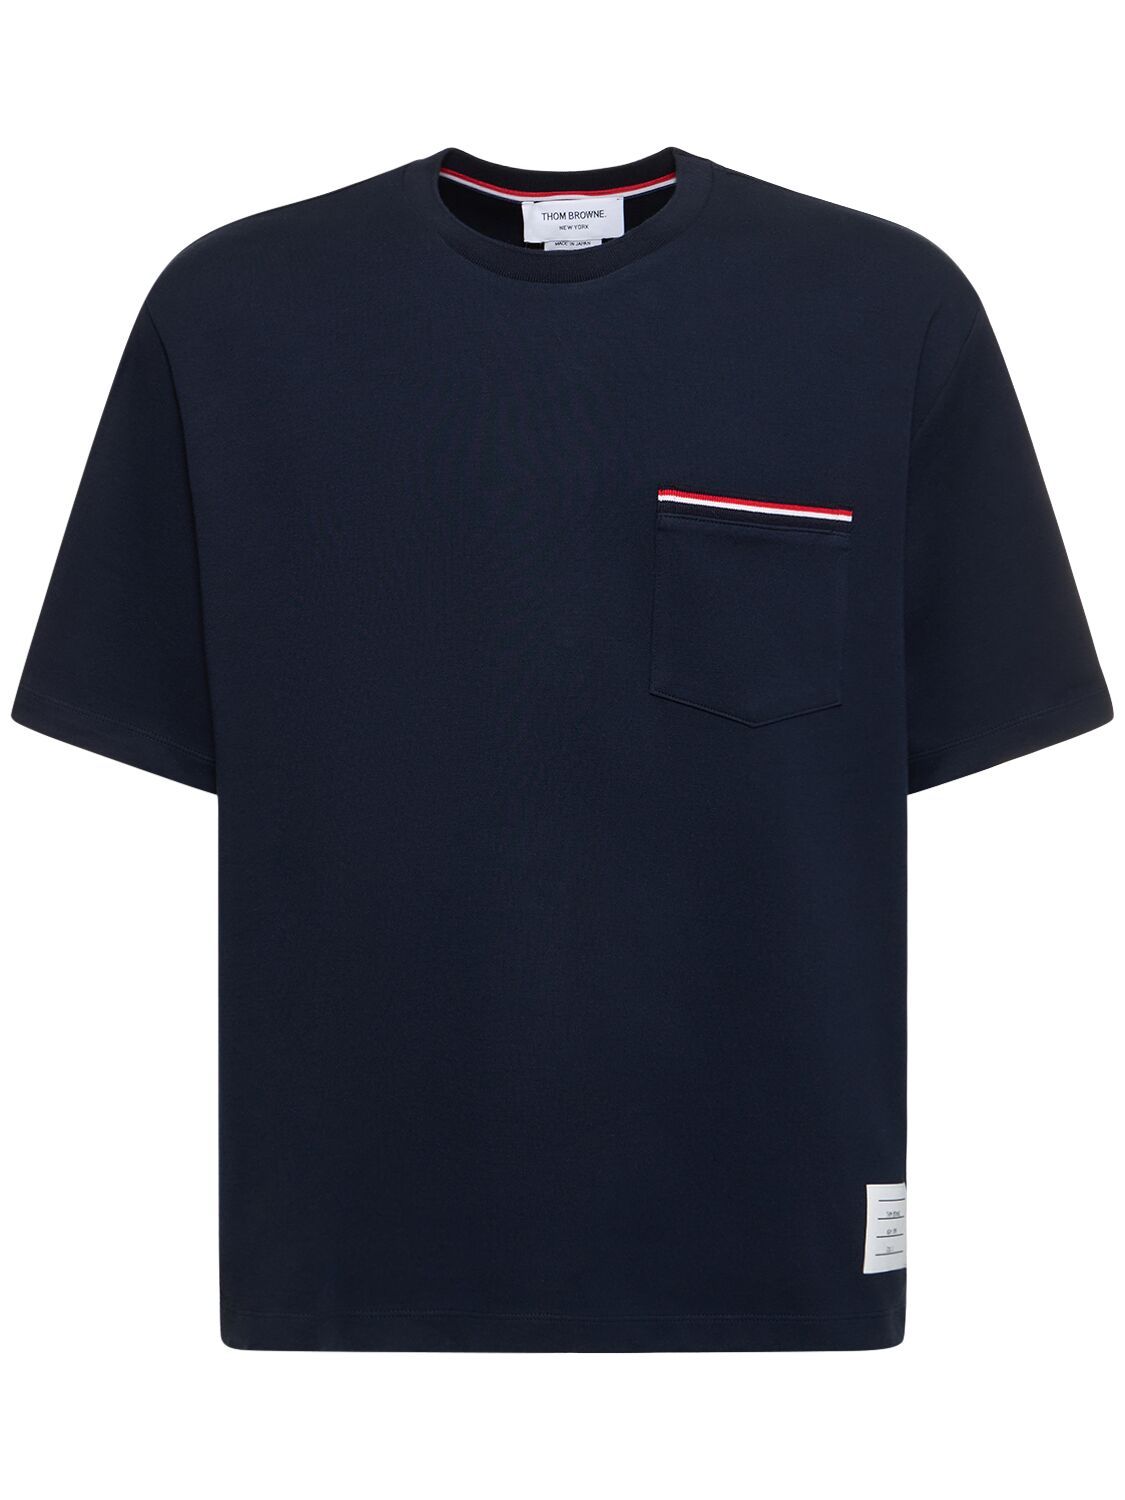 Thom Browne Cotton Jersey T-shirt W/ Striped Trim In Navy